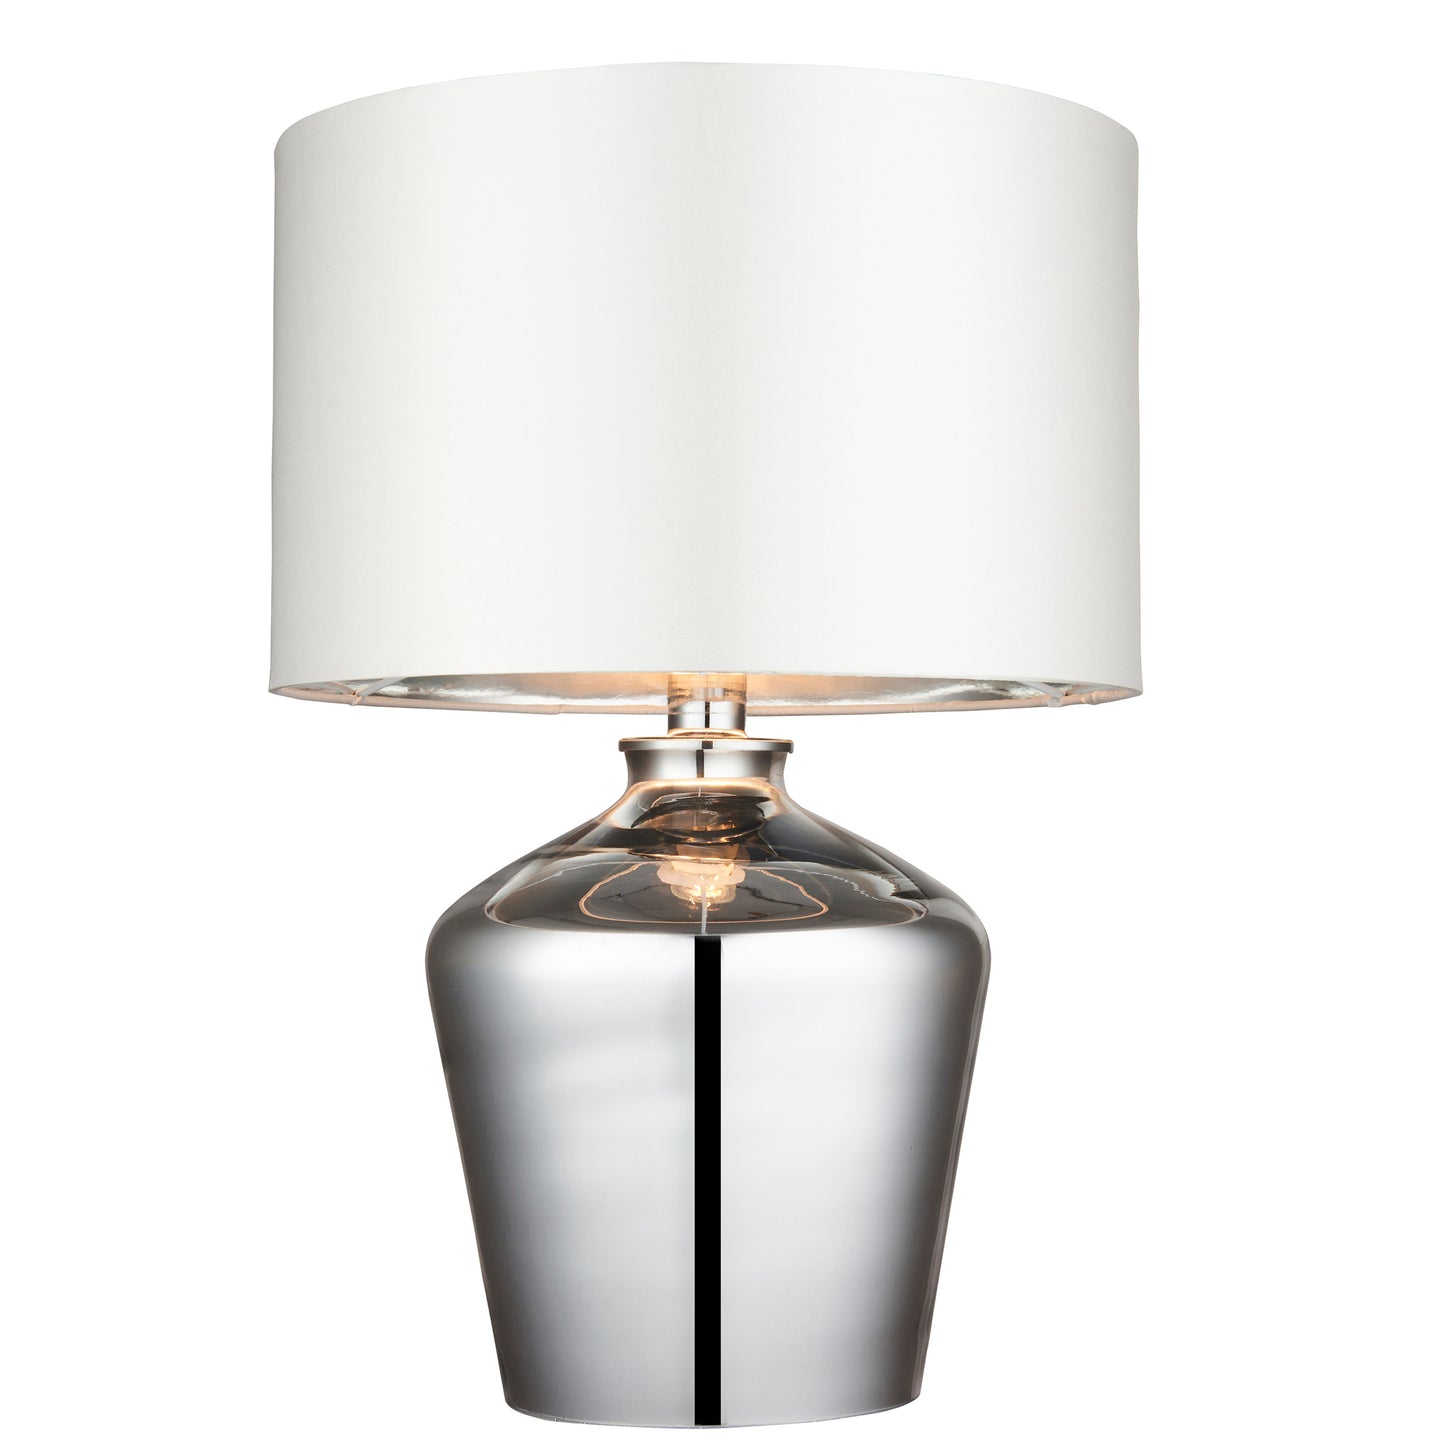 A Waldorf Table Lamp with a white shade, perfect for home interior decor.